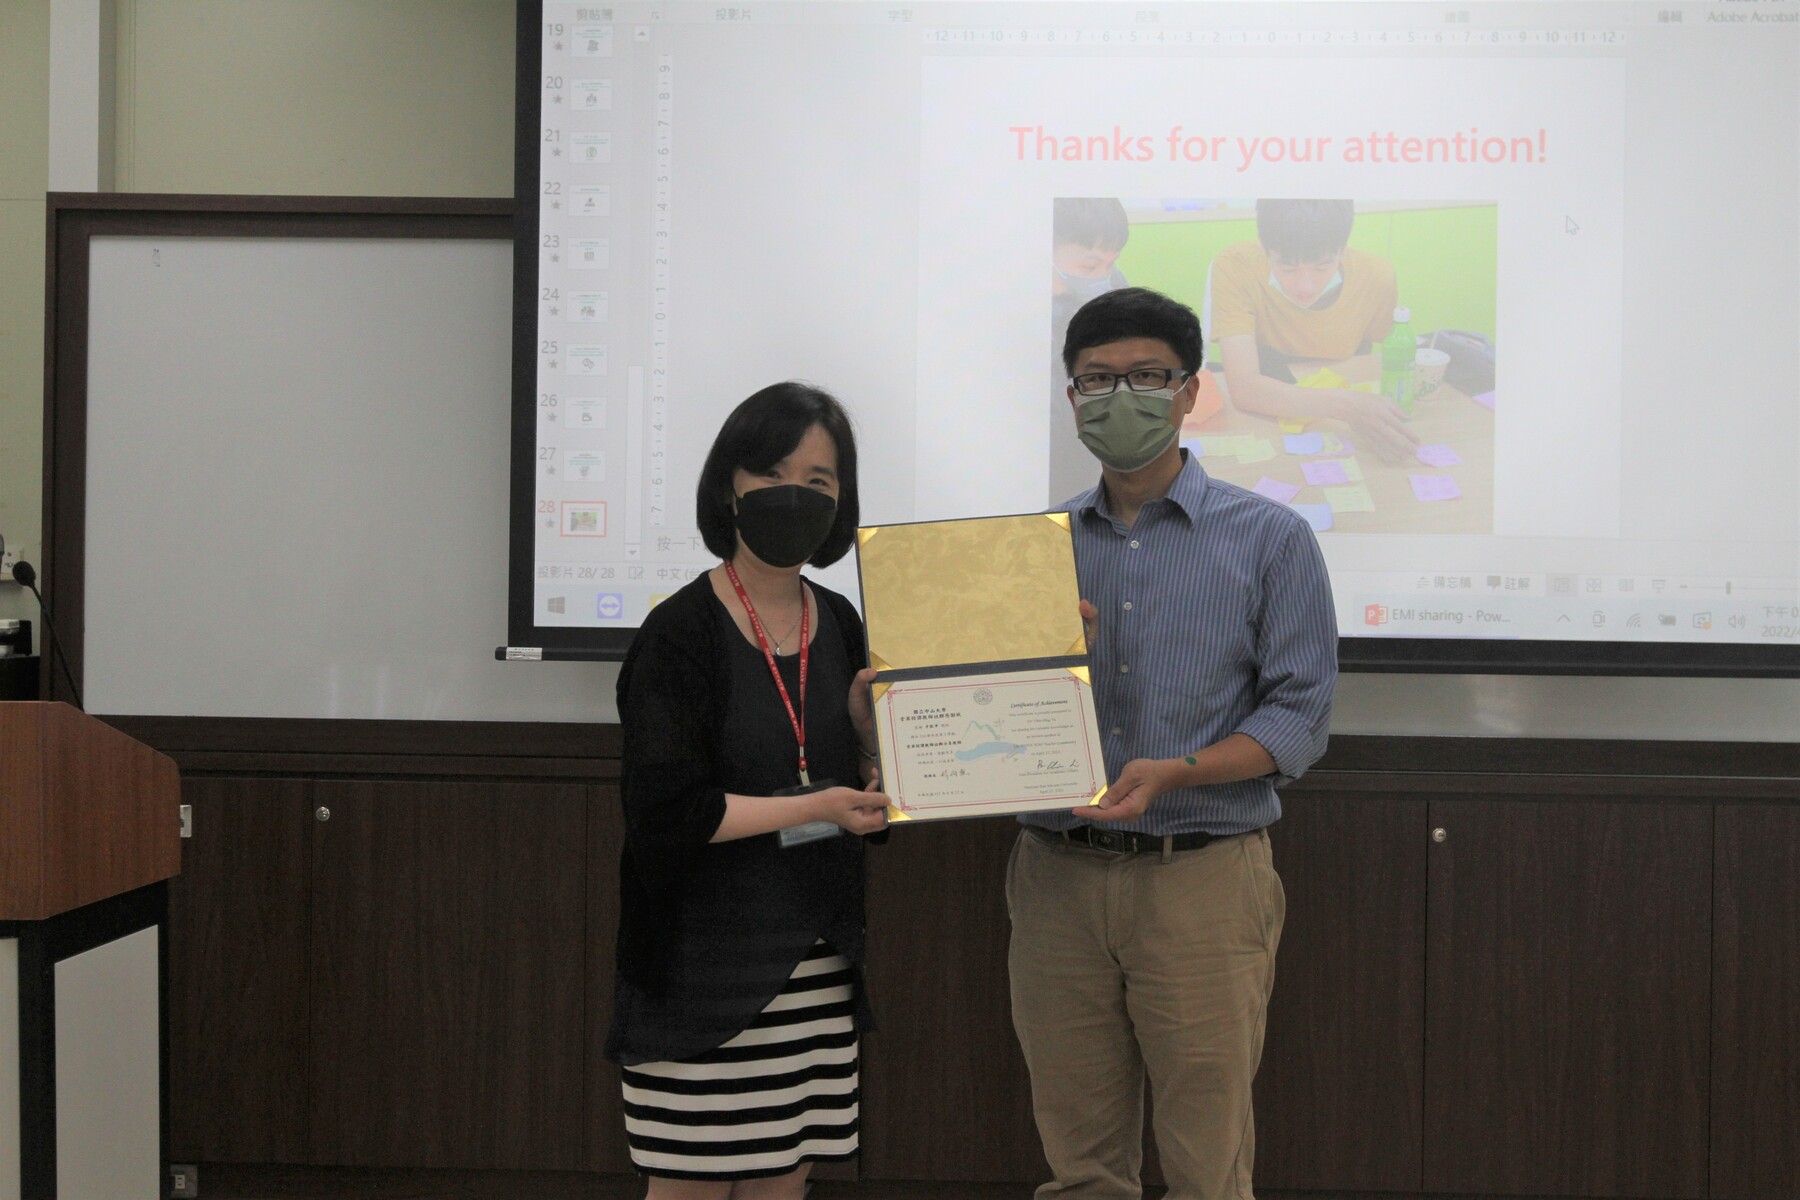 Chin-pin Yu received the Certificate of Appreciation from Shu-chen Ou, the Director of Teaching and Learning Development Center.